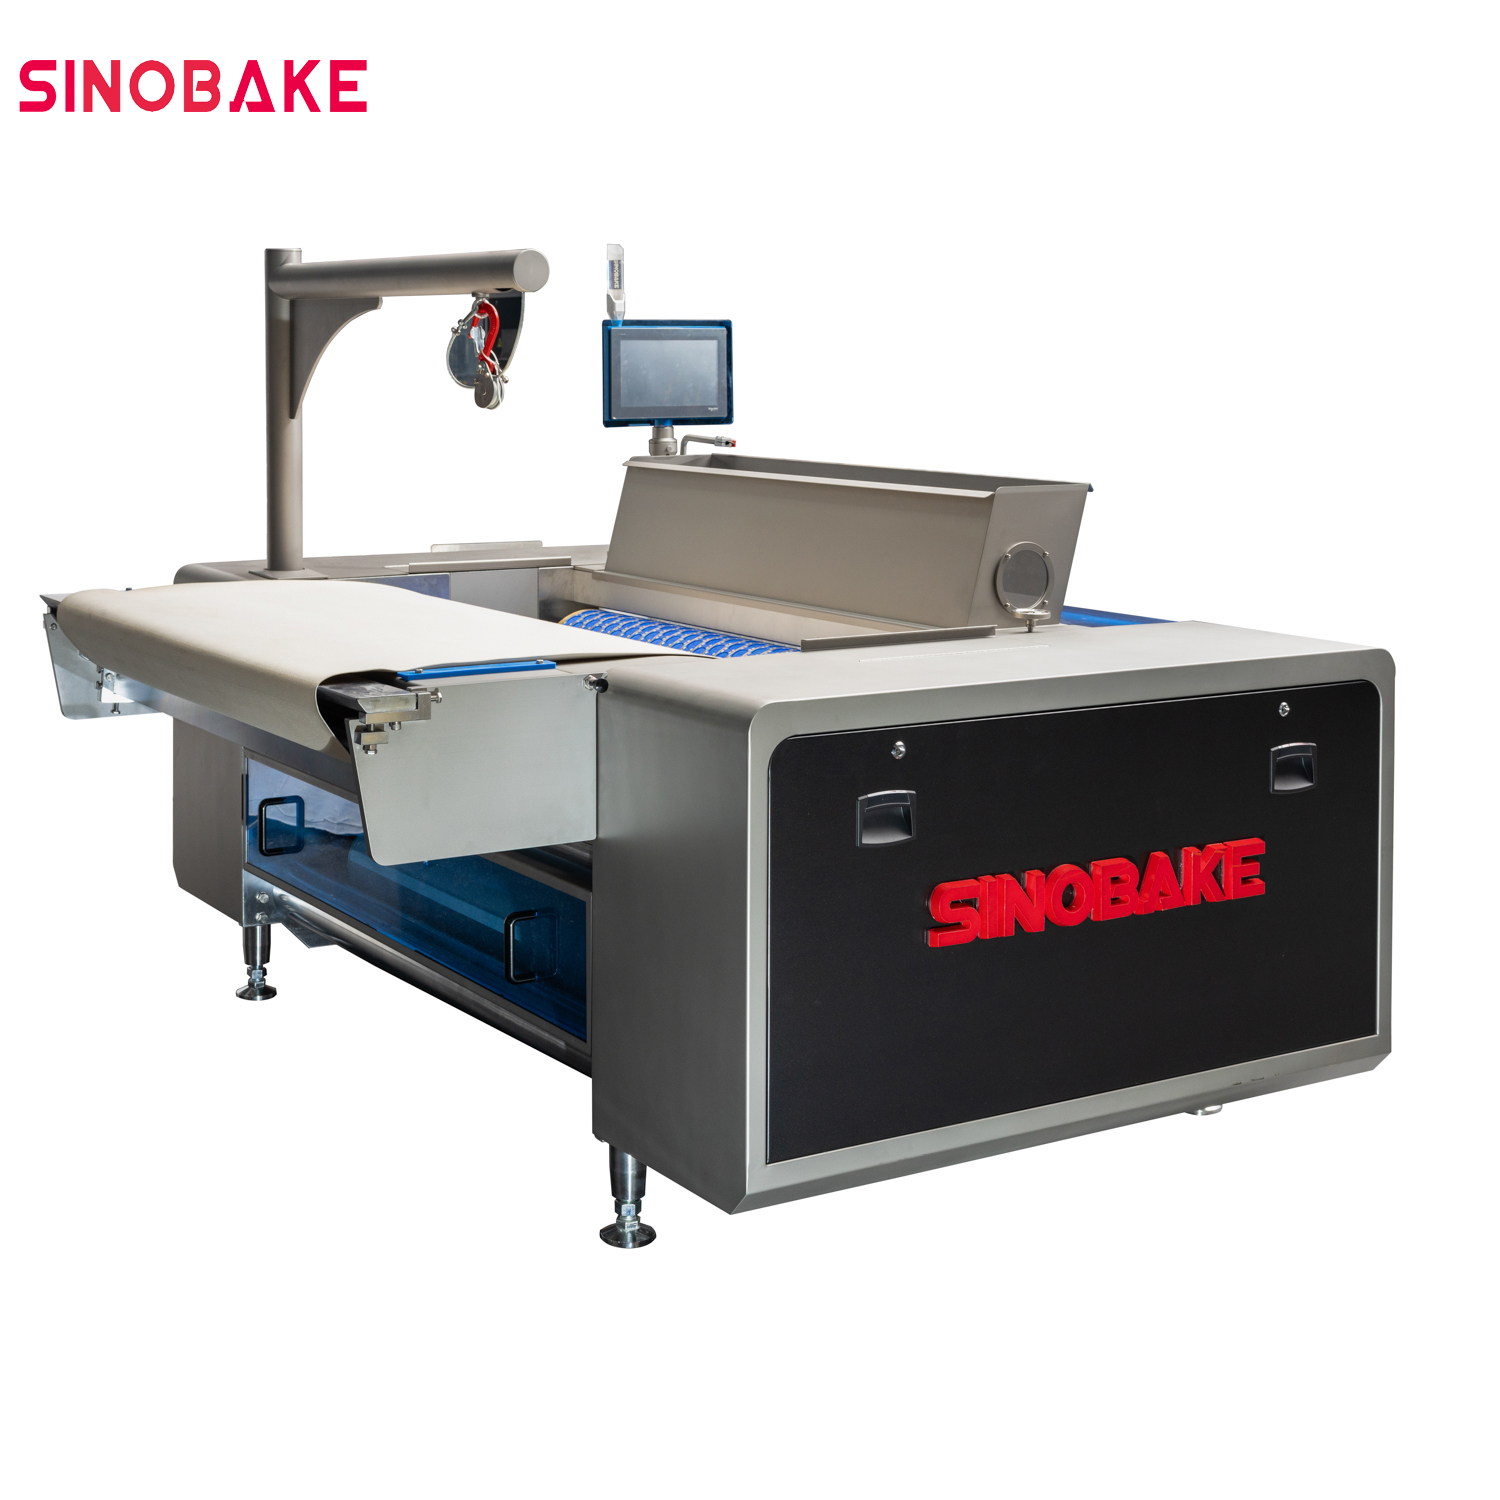 SINOBAKE High Capacity Soft and Hard Biscuit Production Line 